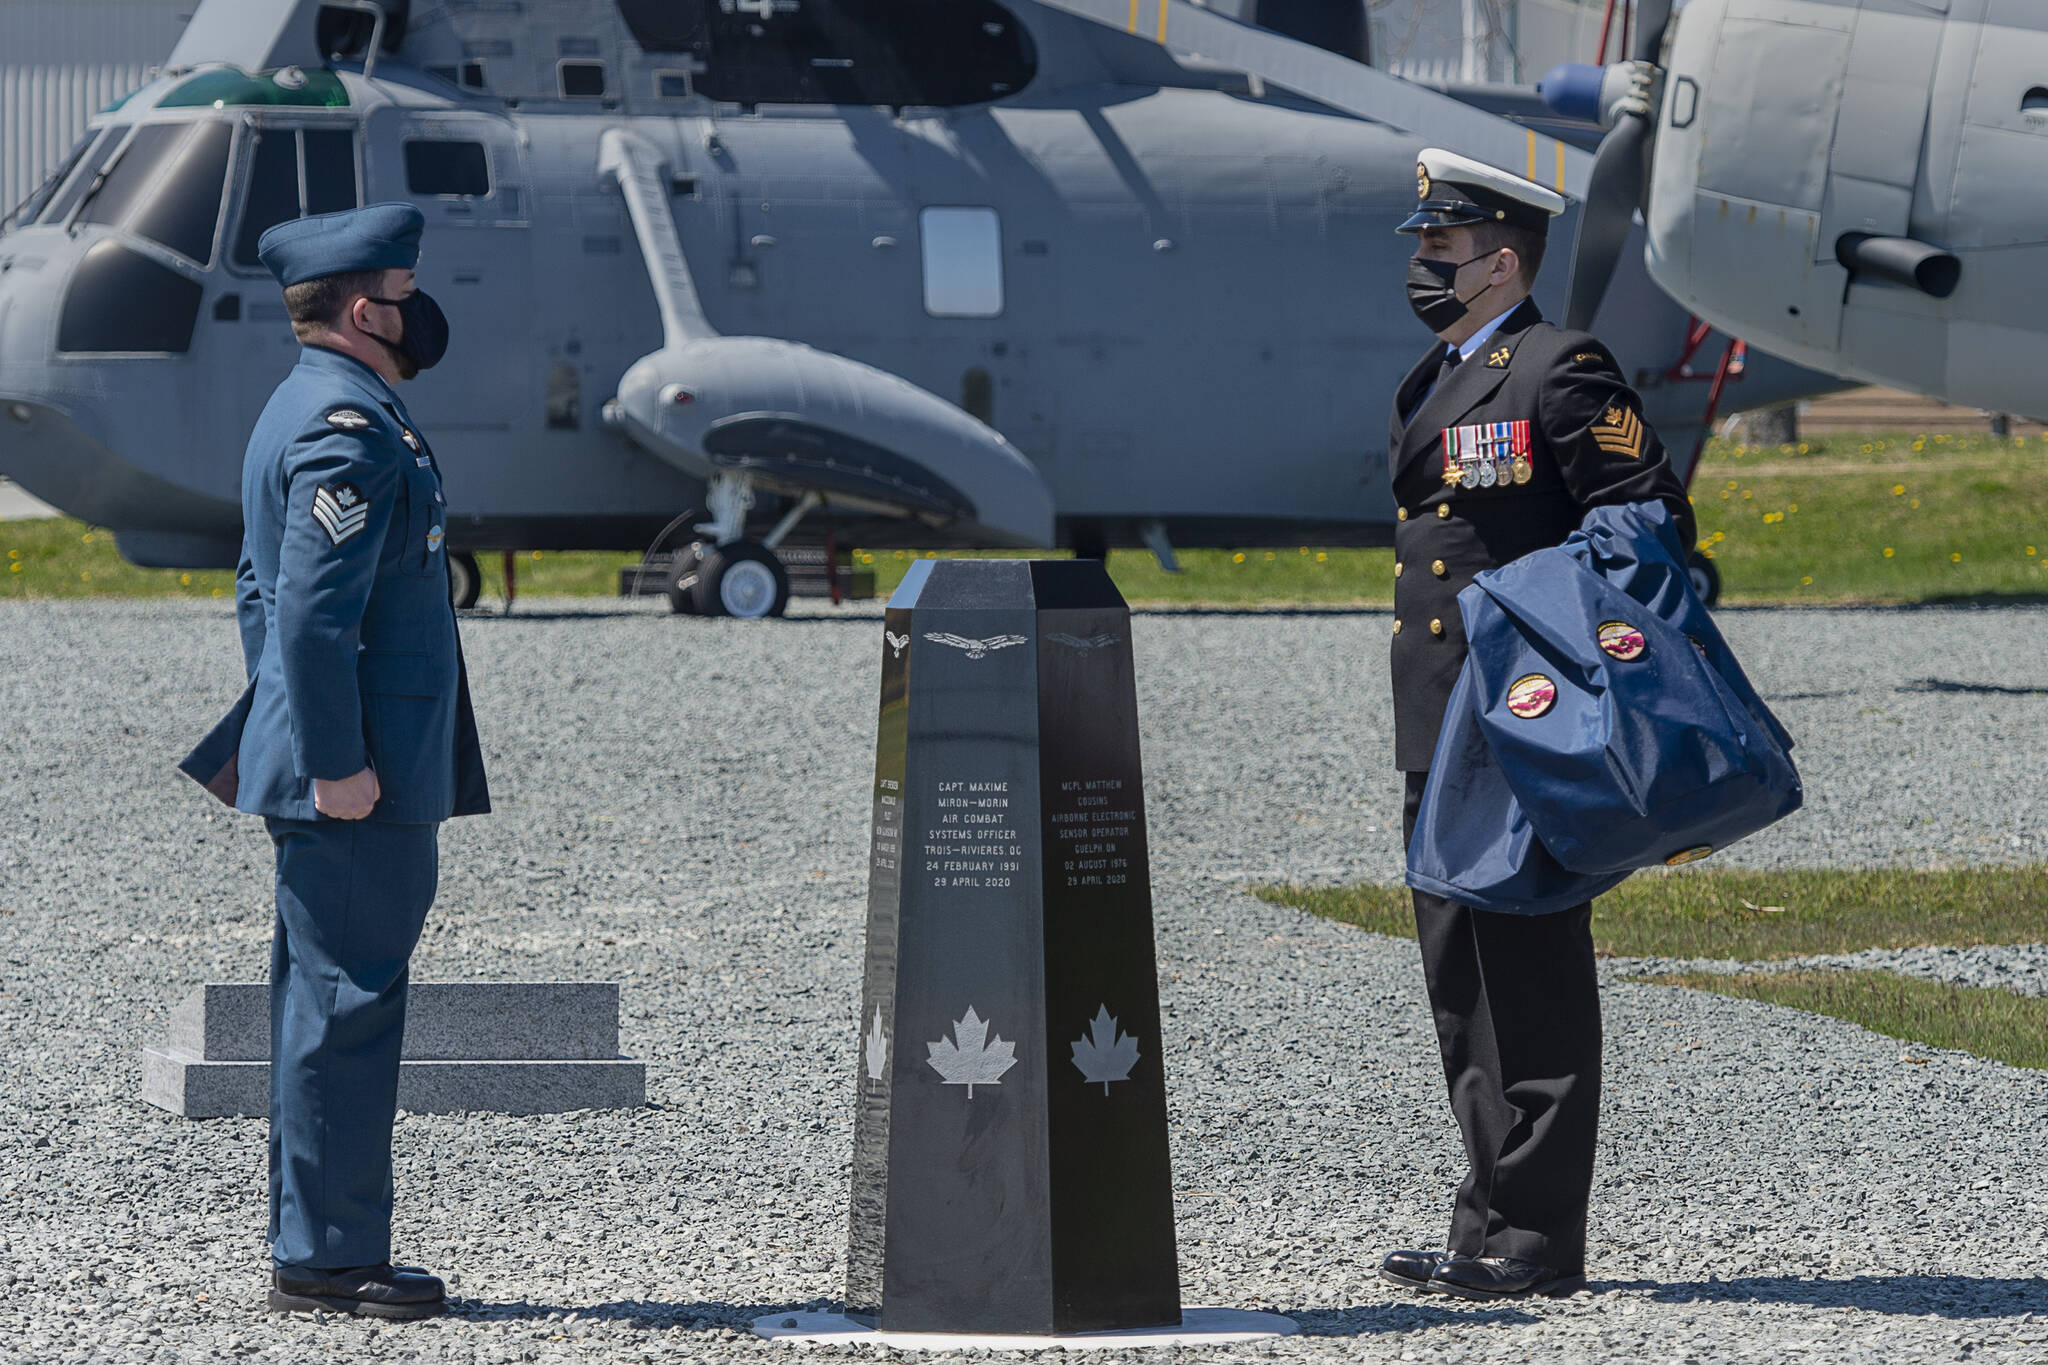 A sailor and an aviator observe a moment of silence after unveiling a memorial at 12 Wing Shearwater in Dartmouth, N.S. on the first anniversary of a CH-148 Cyclone helicopter crash that claimed the lives of six Canadian Forces members when the aircraft plunged into the ocean, on Thursday, April 29, 2021. THE CANADIAN PRESS/Andrew Vaughan